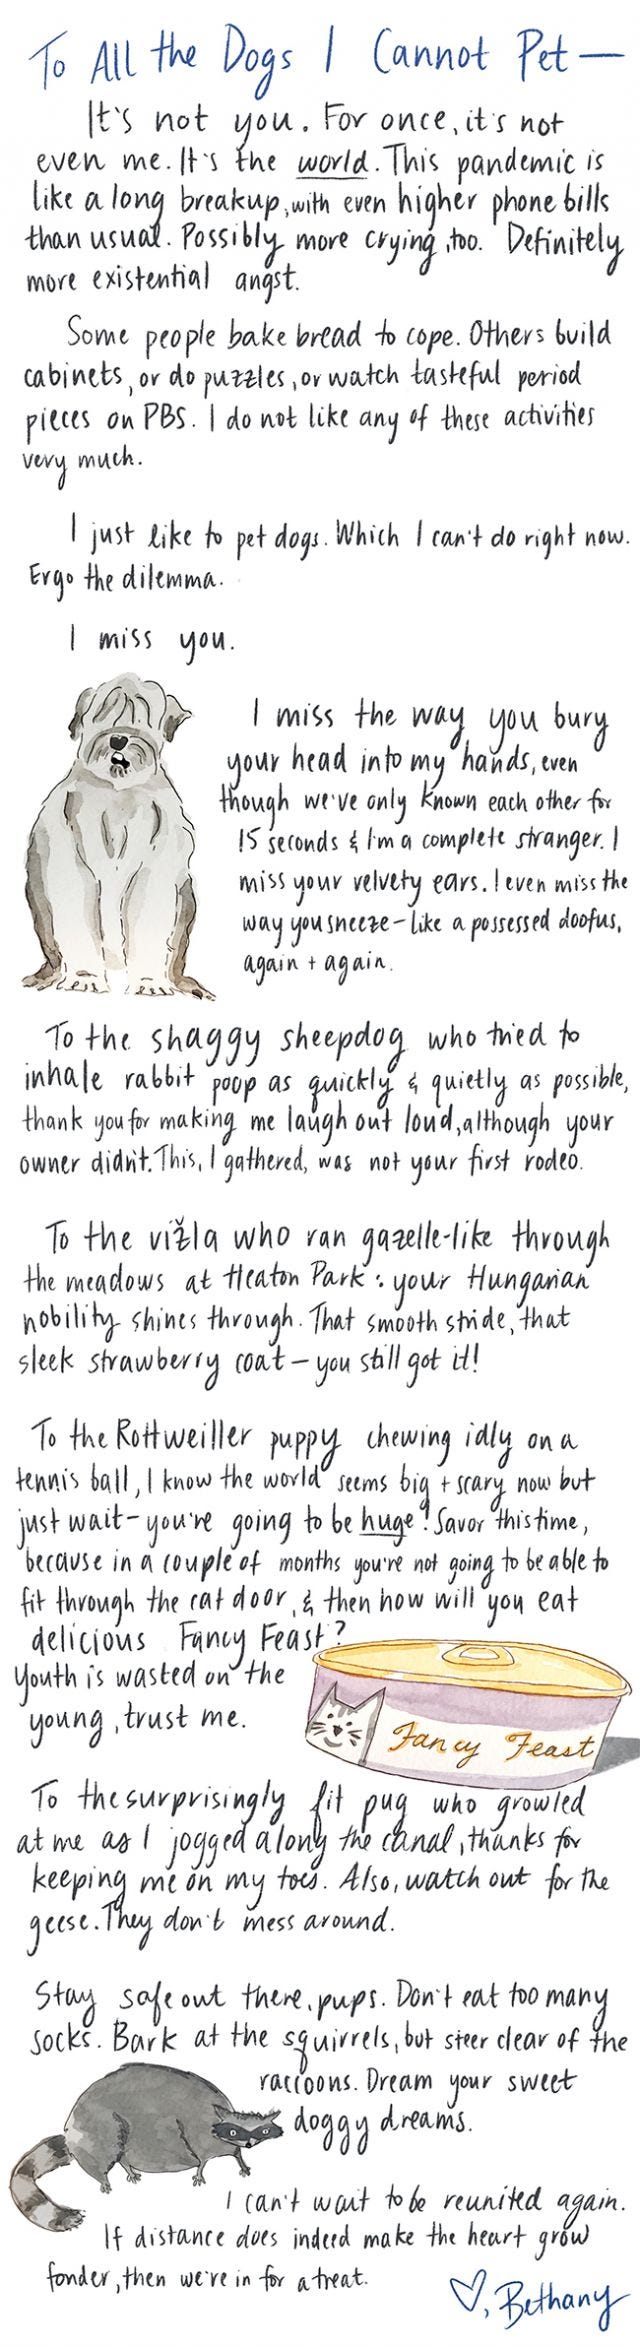 To All the Dogs I Cannot Pet: illustrated essay by Bethany Kaylor